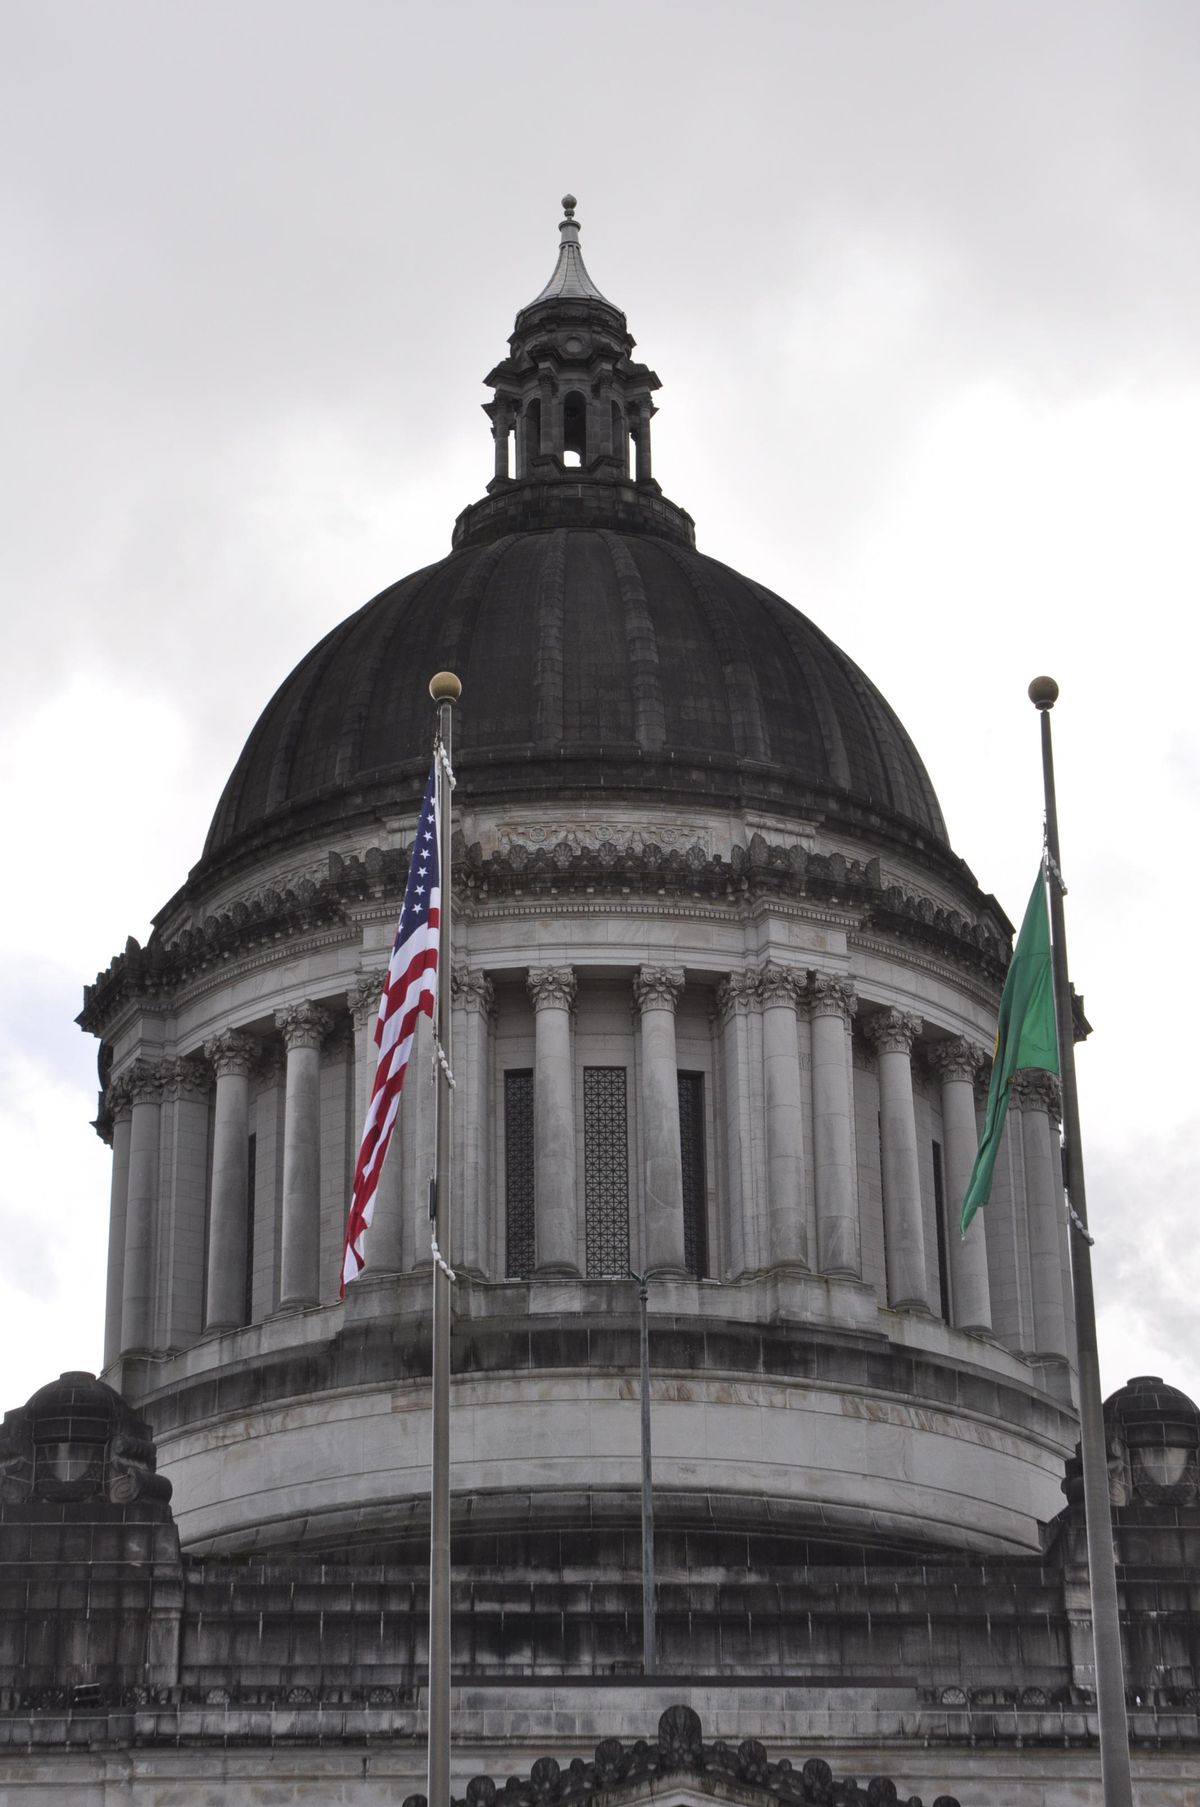 OLYMPIA – The mold and moss that is greying the masonry dome on the Legislative Building will be cleaned with a $3.4 million appropriation added to the capital construction budget. (Jim Camden / The Spokesman-Review)